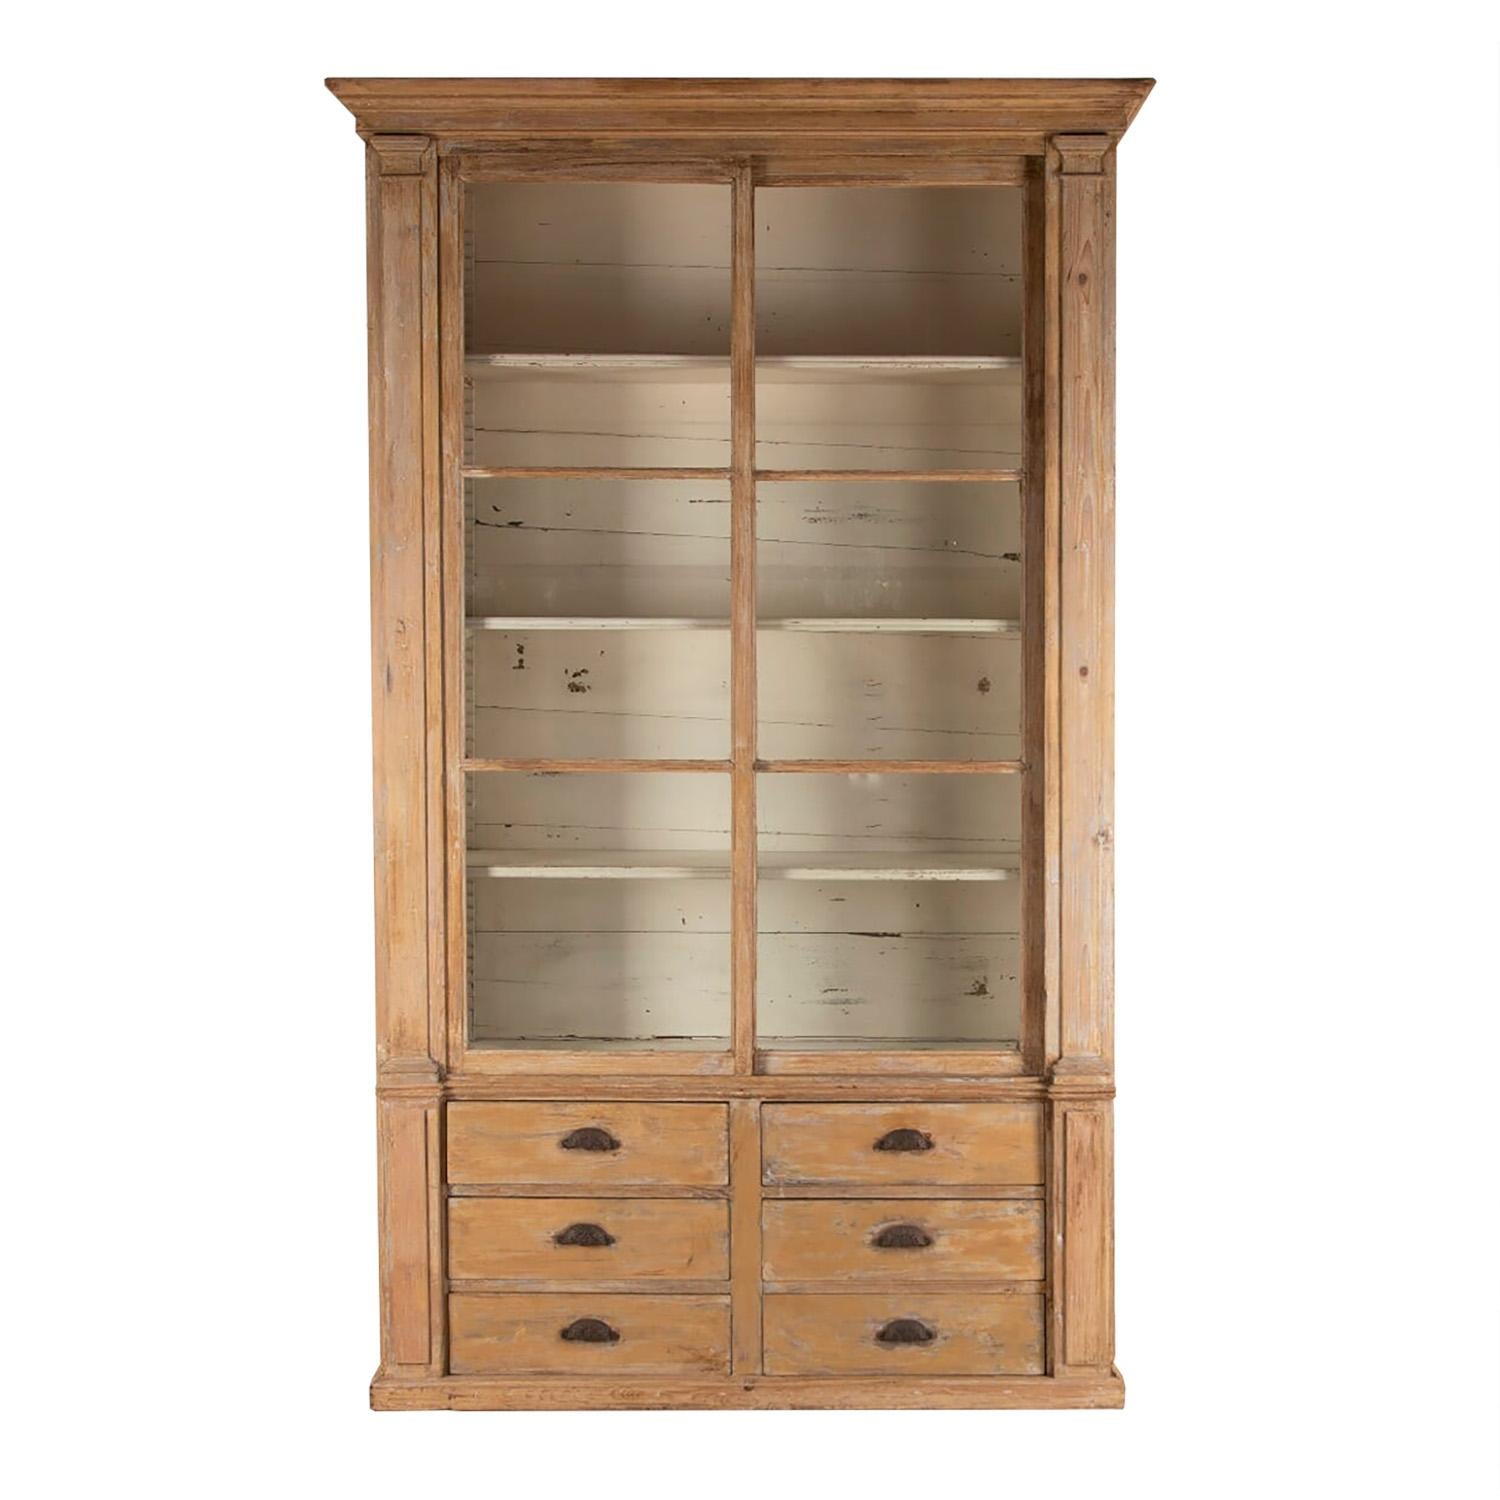 Early 19th century pharmacy cabinet with original paint. This piece has a glass sliding door which opens to shelved storage, below are six useful drawers with original handles.